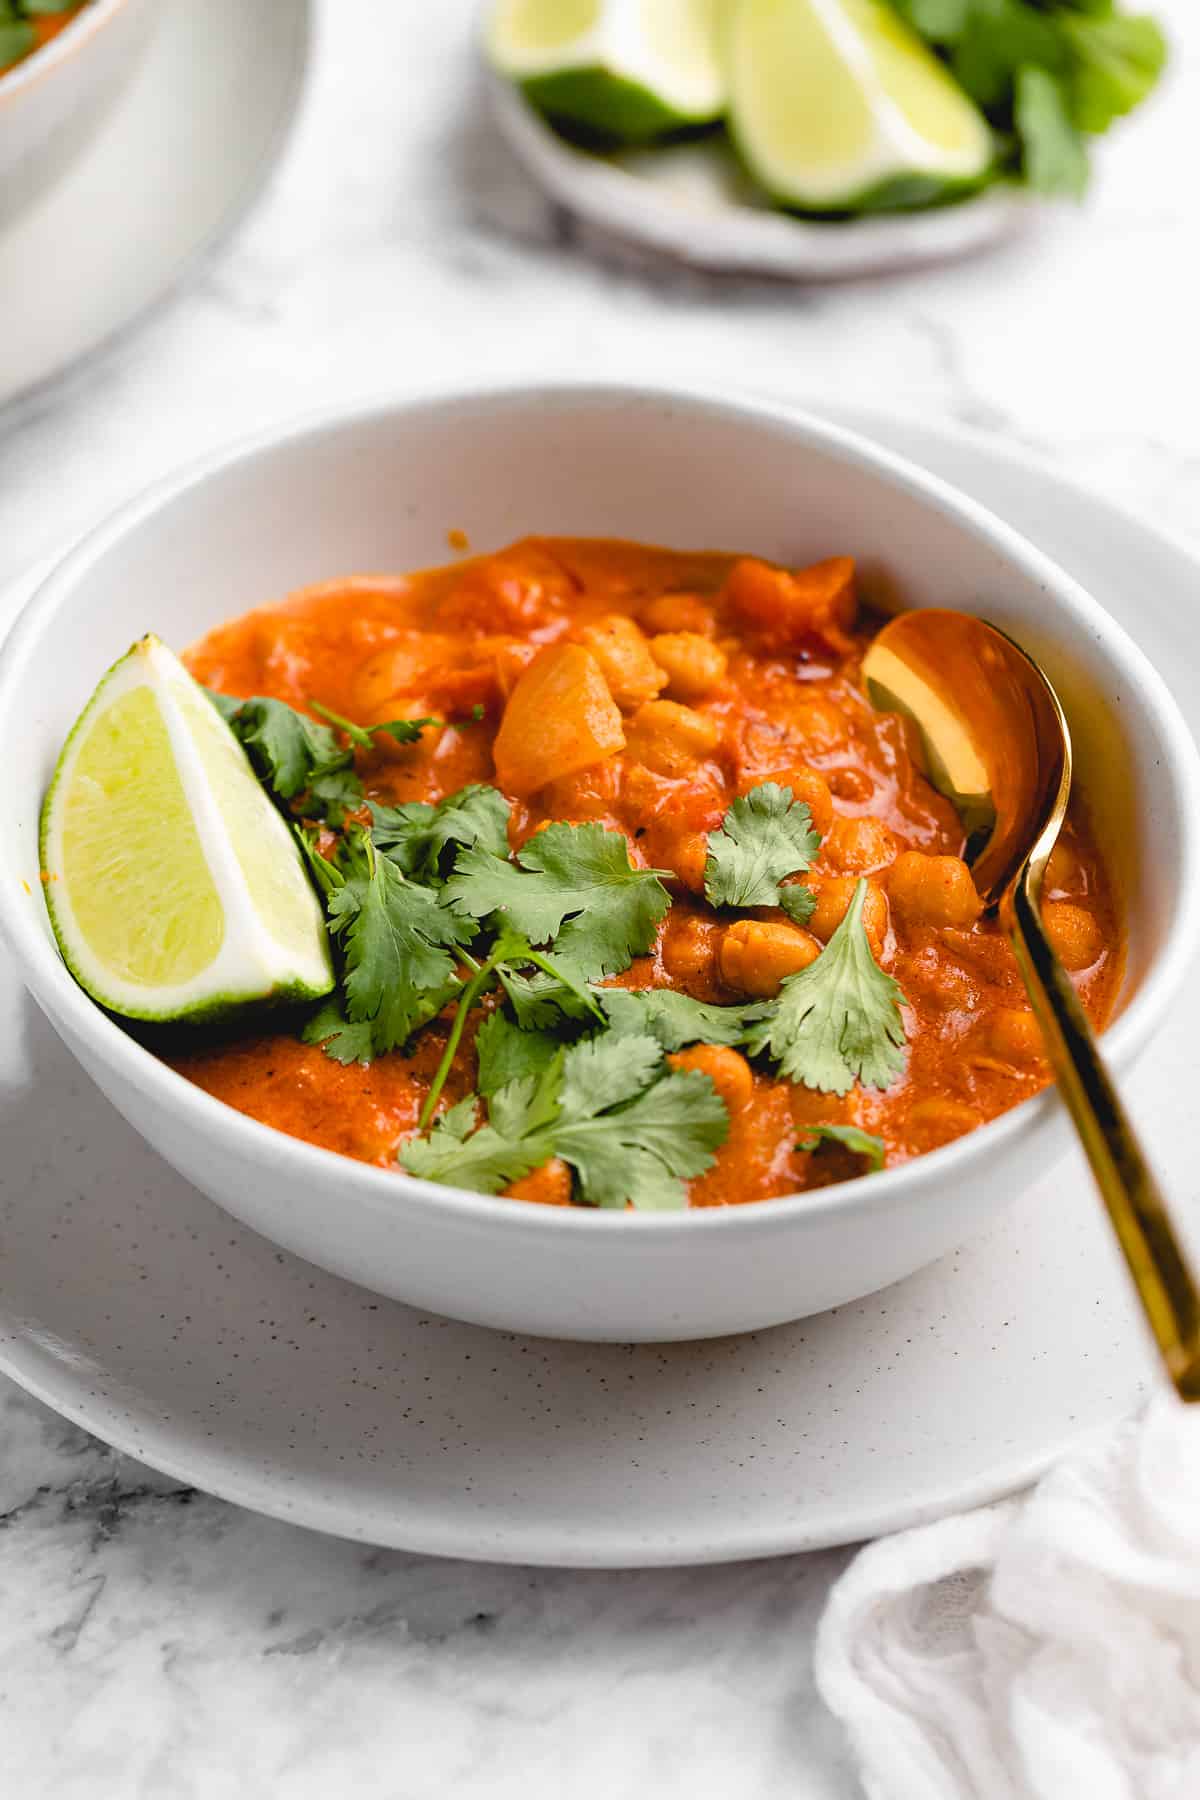 Top 2 Chickpea Curry Recipes